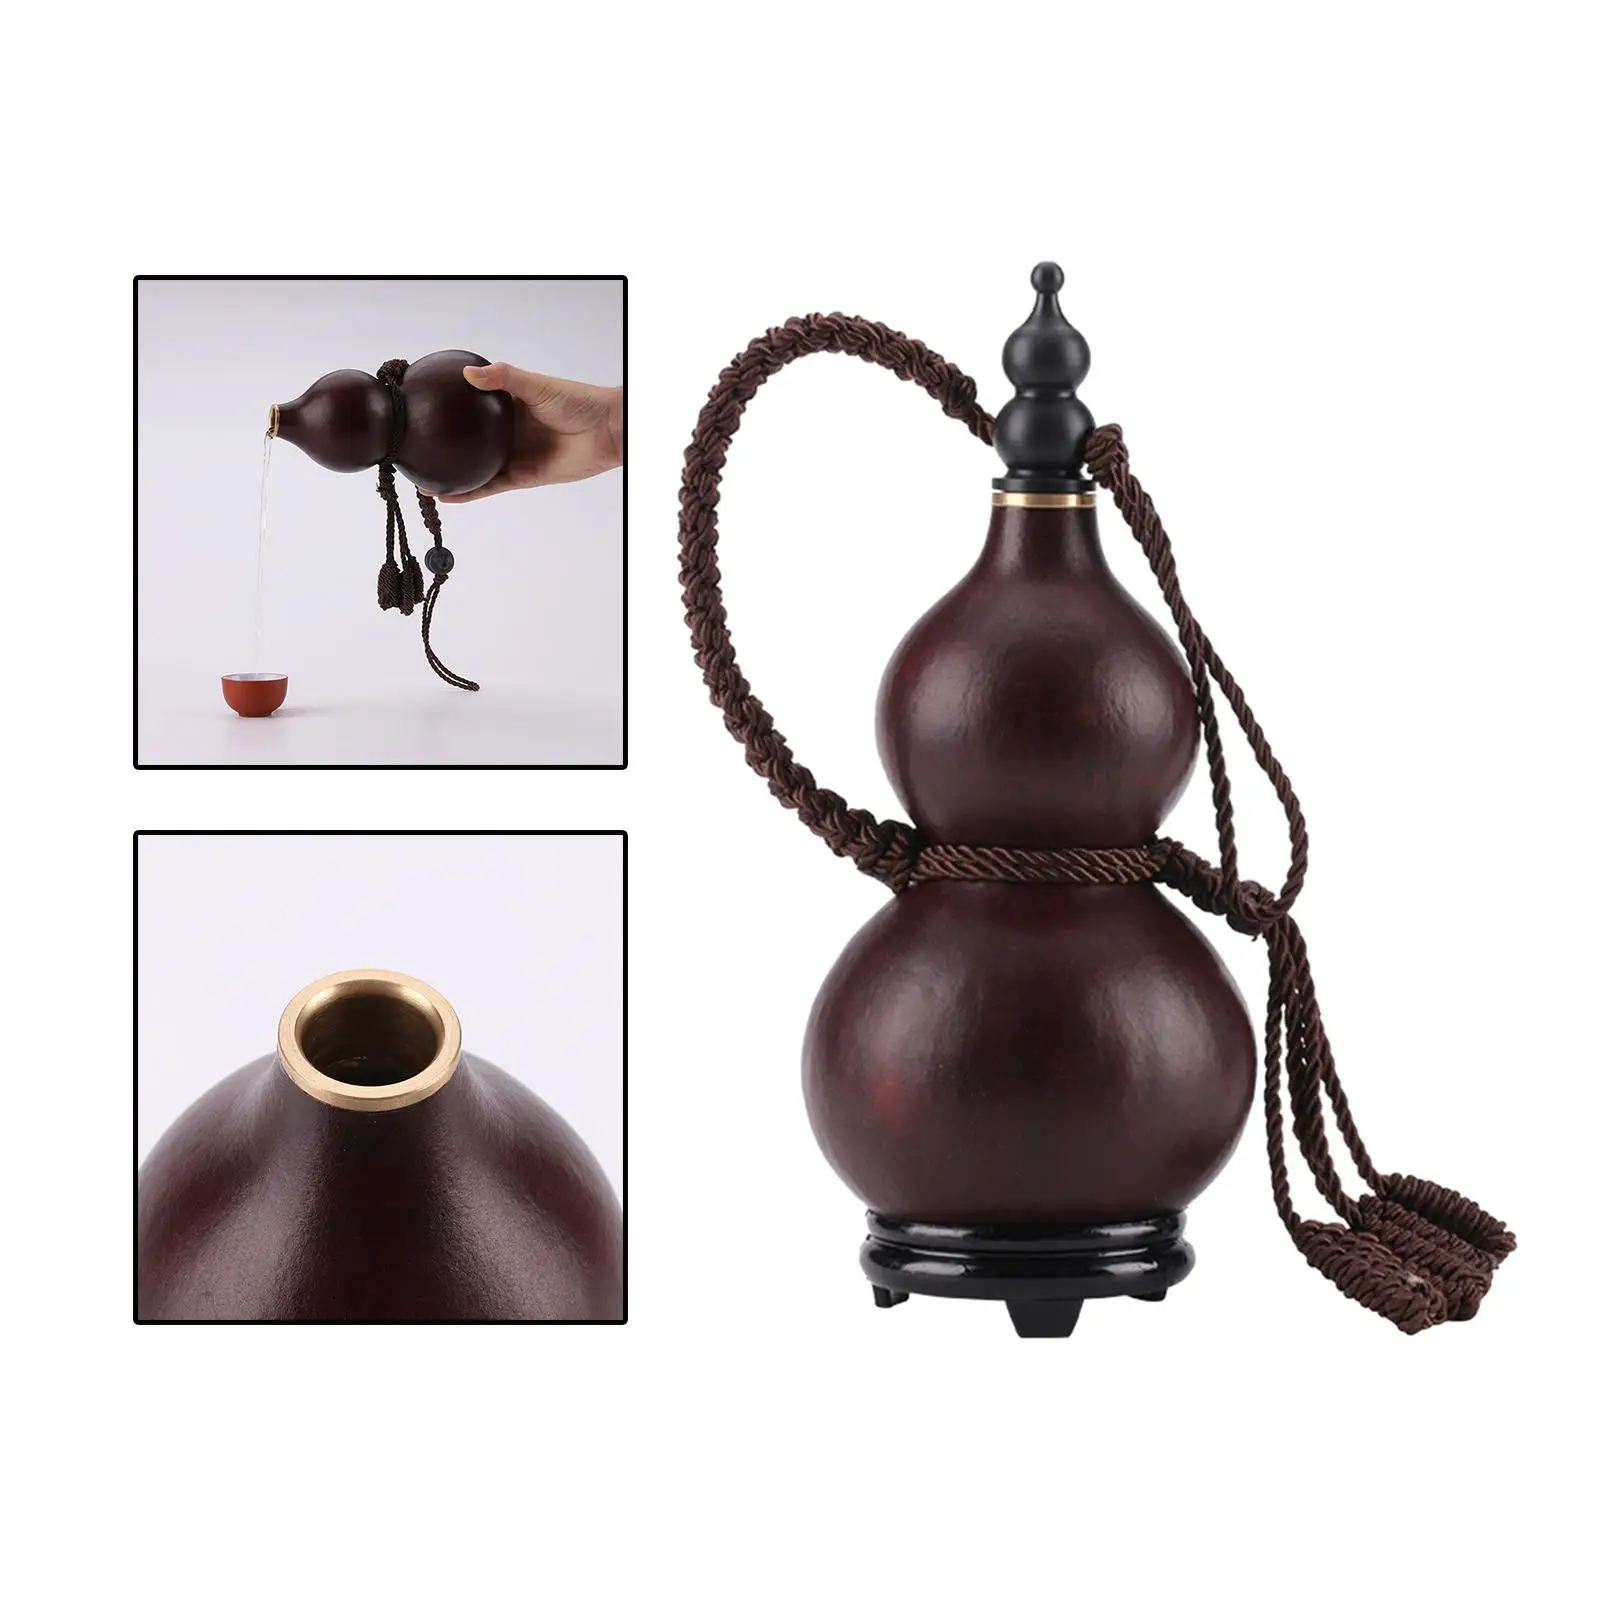 Traditional Gourd Wine Bottle Hollow Calabash with Lid Drinking Gourd Portable for Drinks Holder Indoor Craft Outdoor Decoration